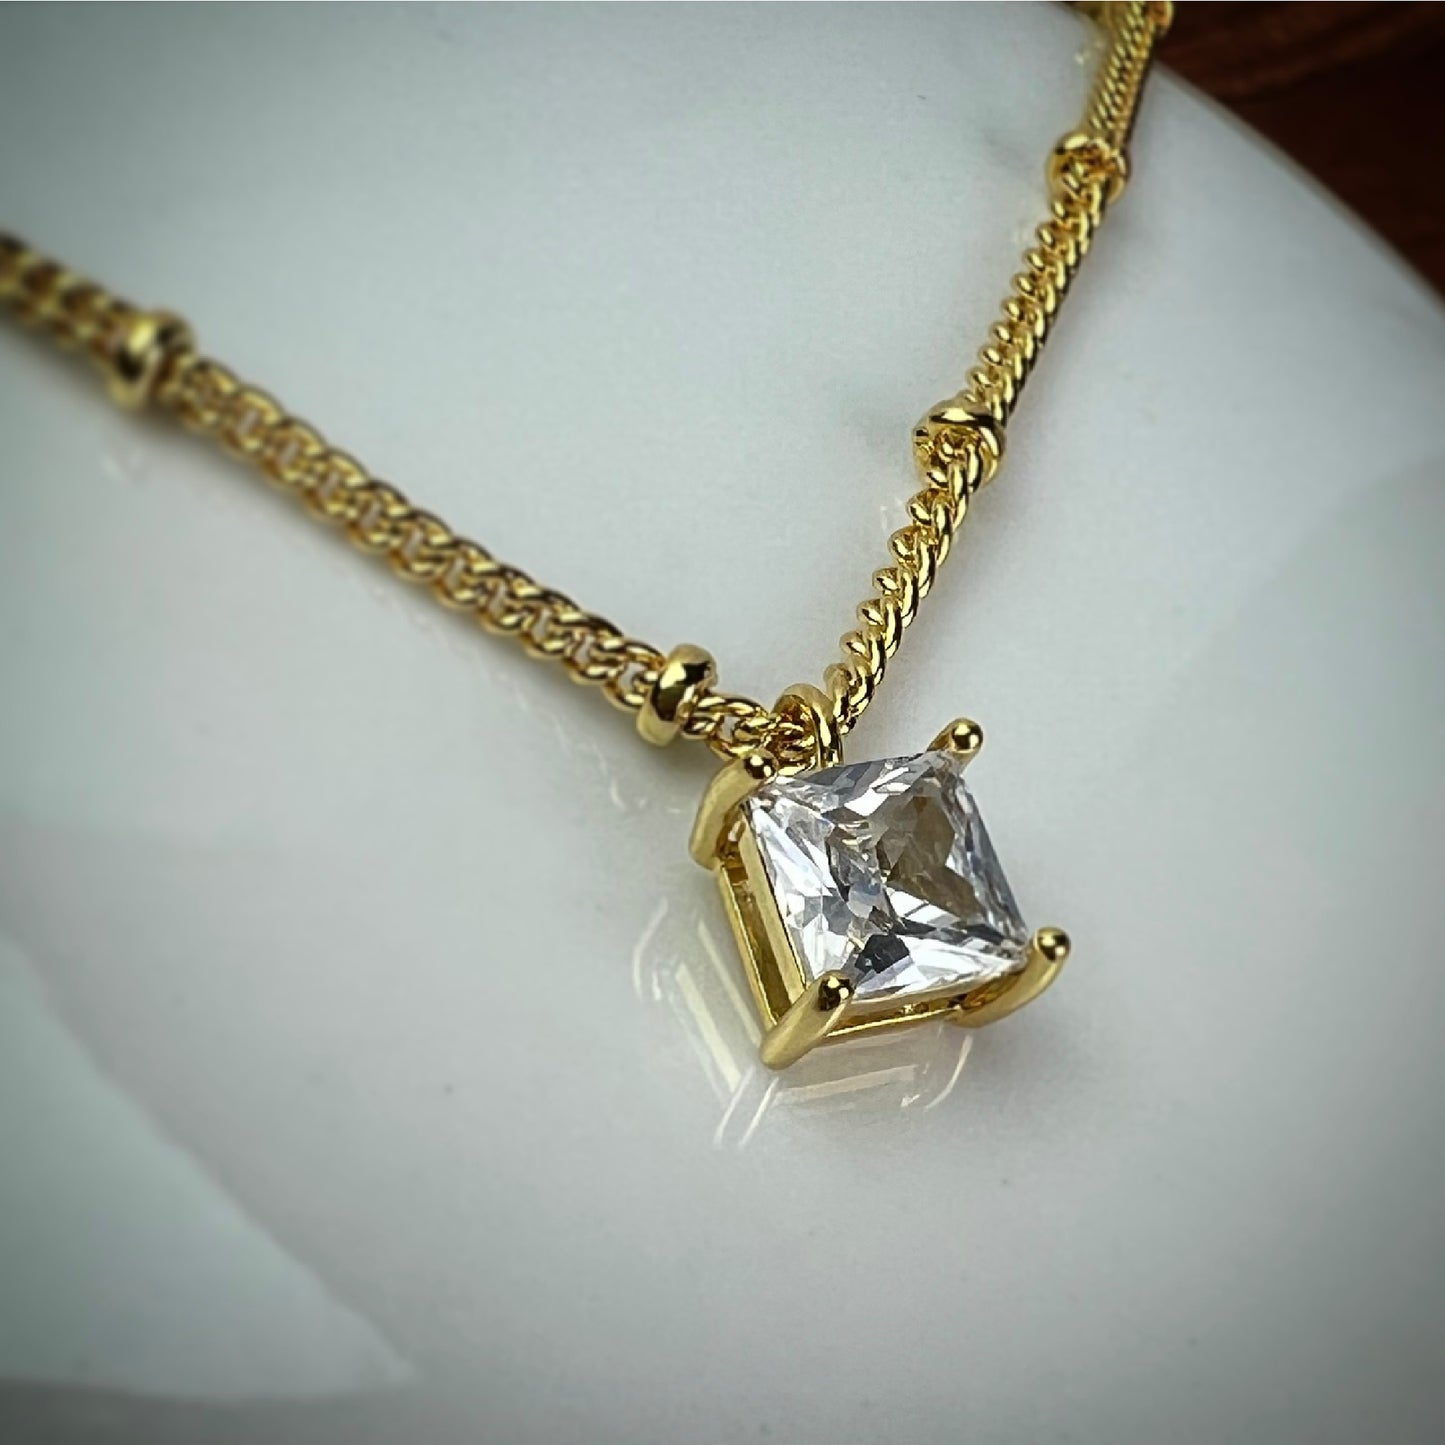 Gold-Plated Cubic Zirconia Necklace with Infused Ashes | Memorial Jewelry | Human Ashes, Pet Ashes, or Breast Milk | Custom Keepsake by The Farewell Collection